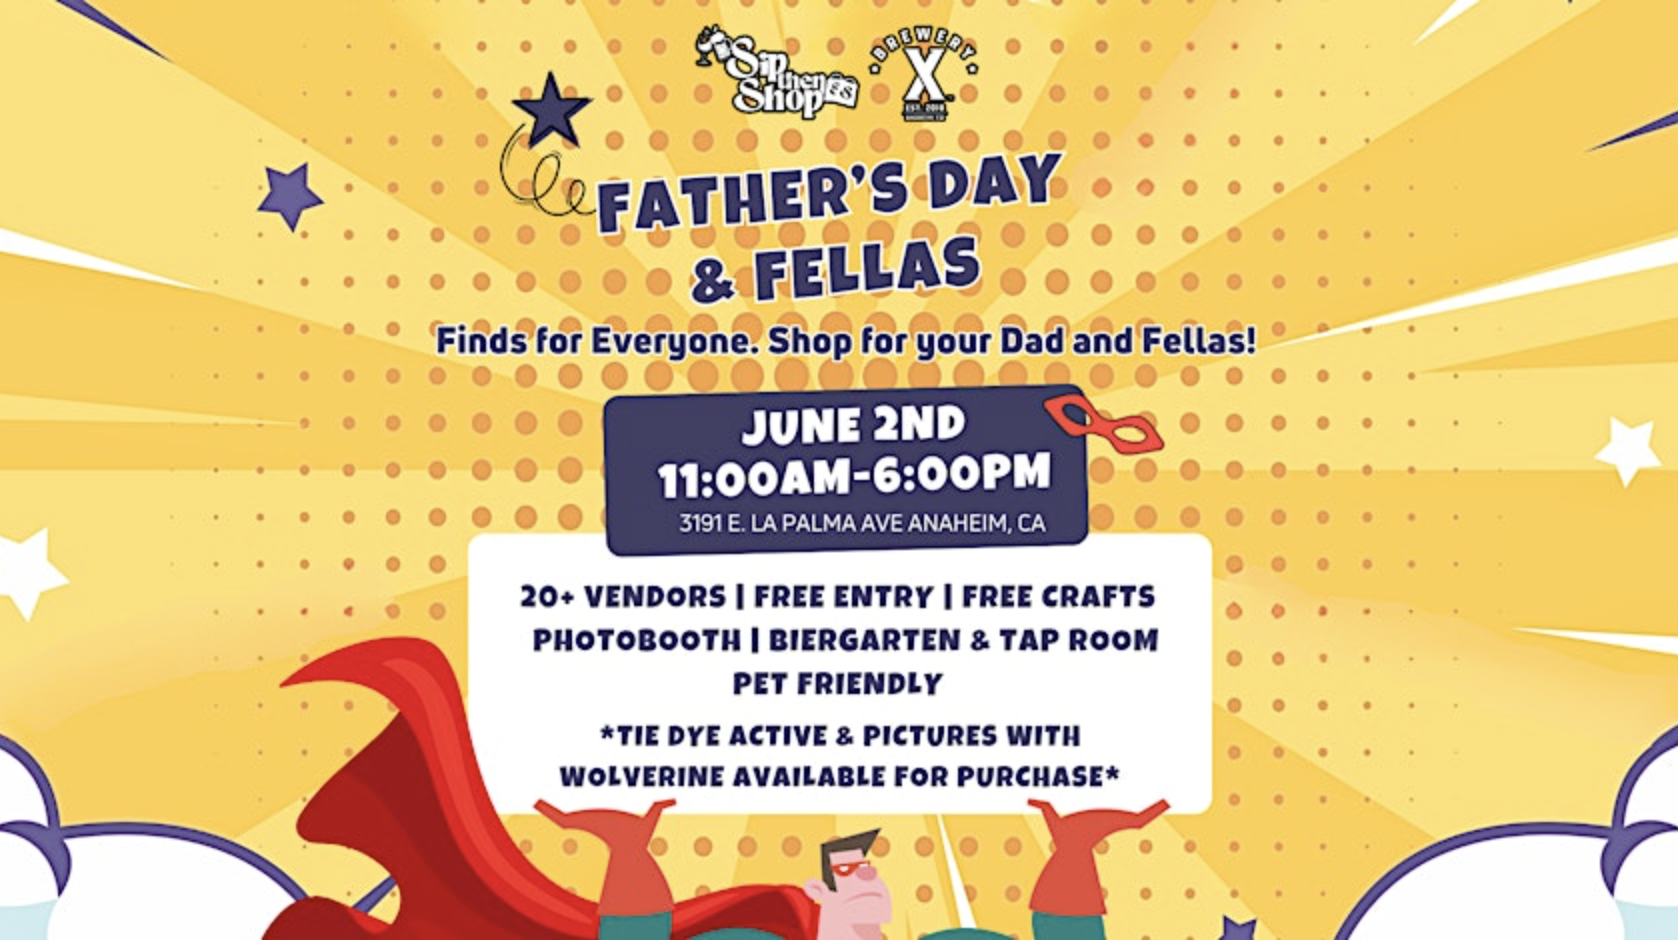 **Father's Day & Fellas Event**

**Date:** June 2nd  
**Time:** 11:00 AM - 6:00 PM  
**Location:** 3191 E La Palma Ave, Anaheim, CA

Join us for a pet-friendly day filled with fun activities. Enjoy over 20 vendors, crafts, a photobooth, and a biergarten. Don't miss the tie-dye activities and special appearances by Wolverine. Free entry for all!